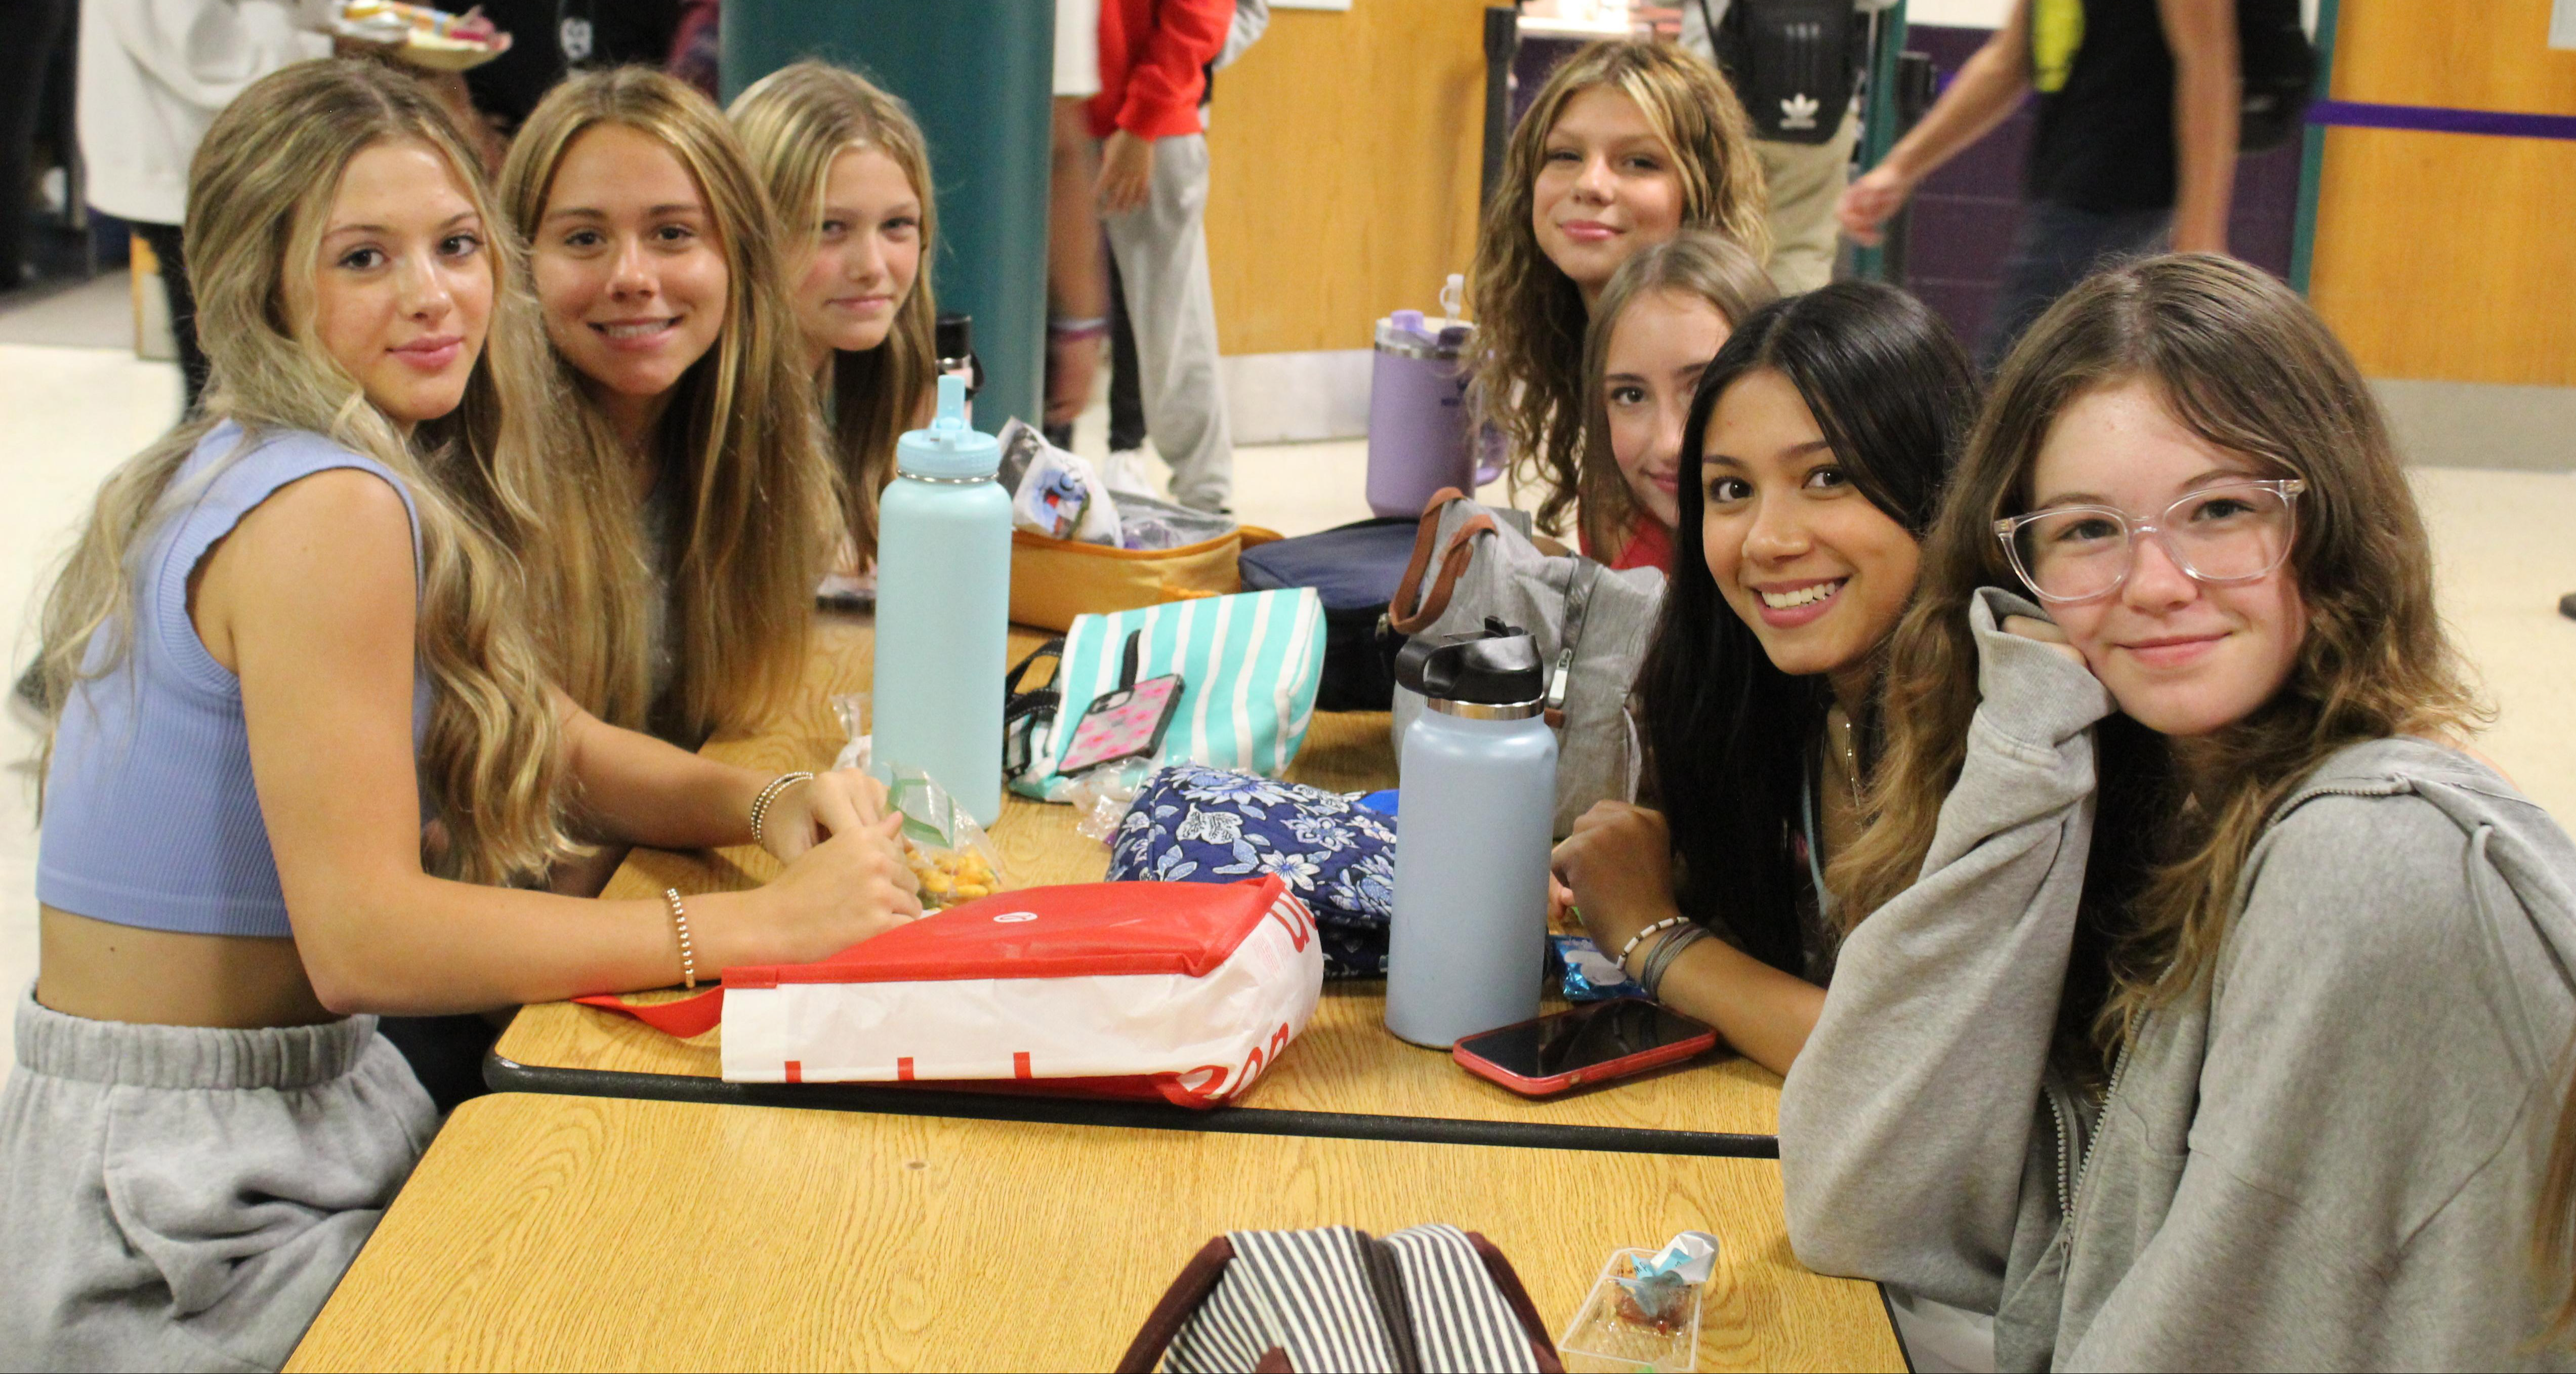 A group of girls eating at the school cafeteria